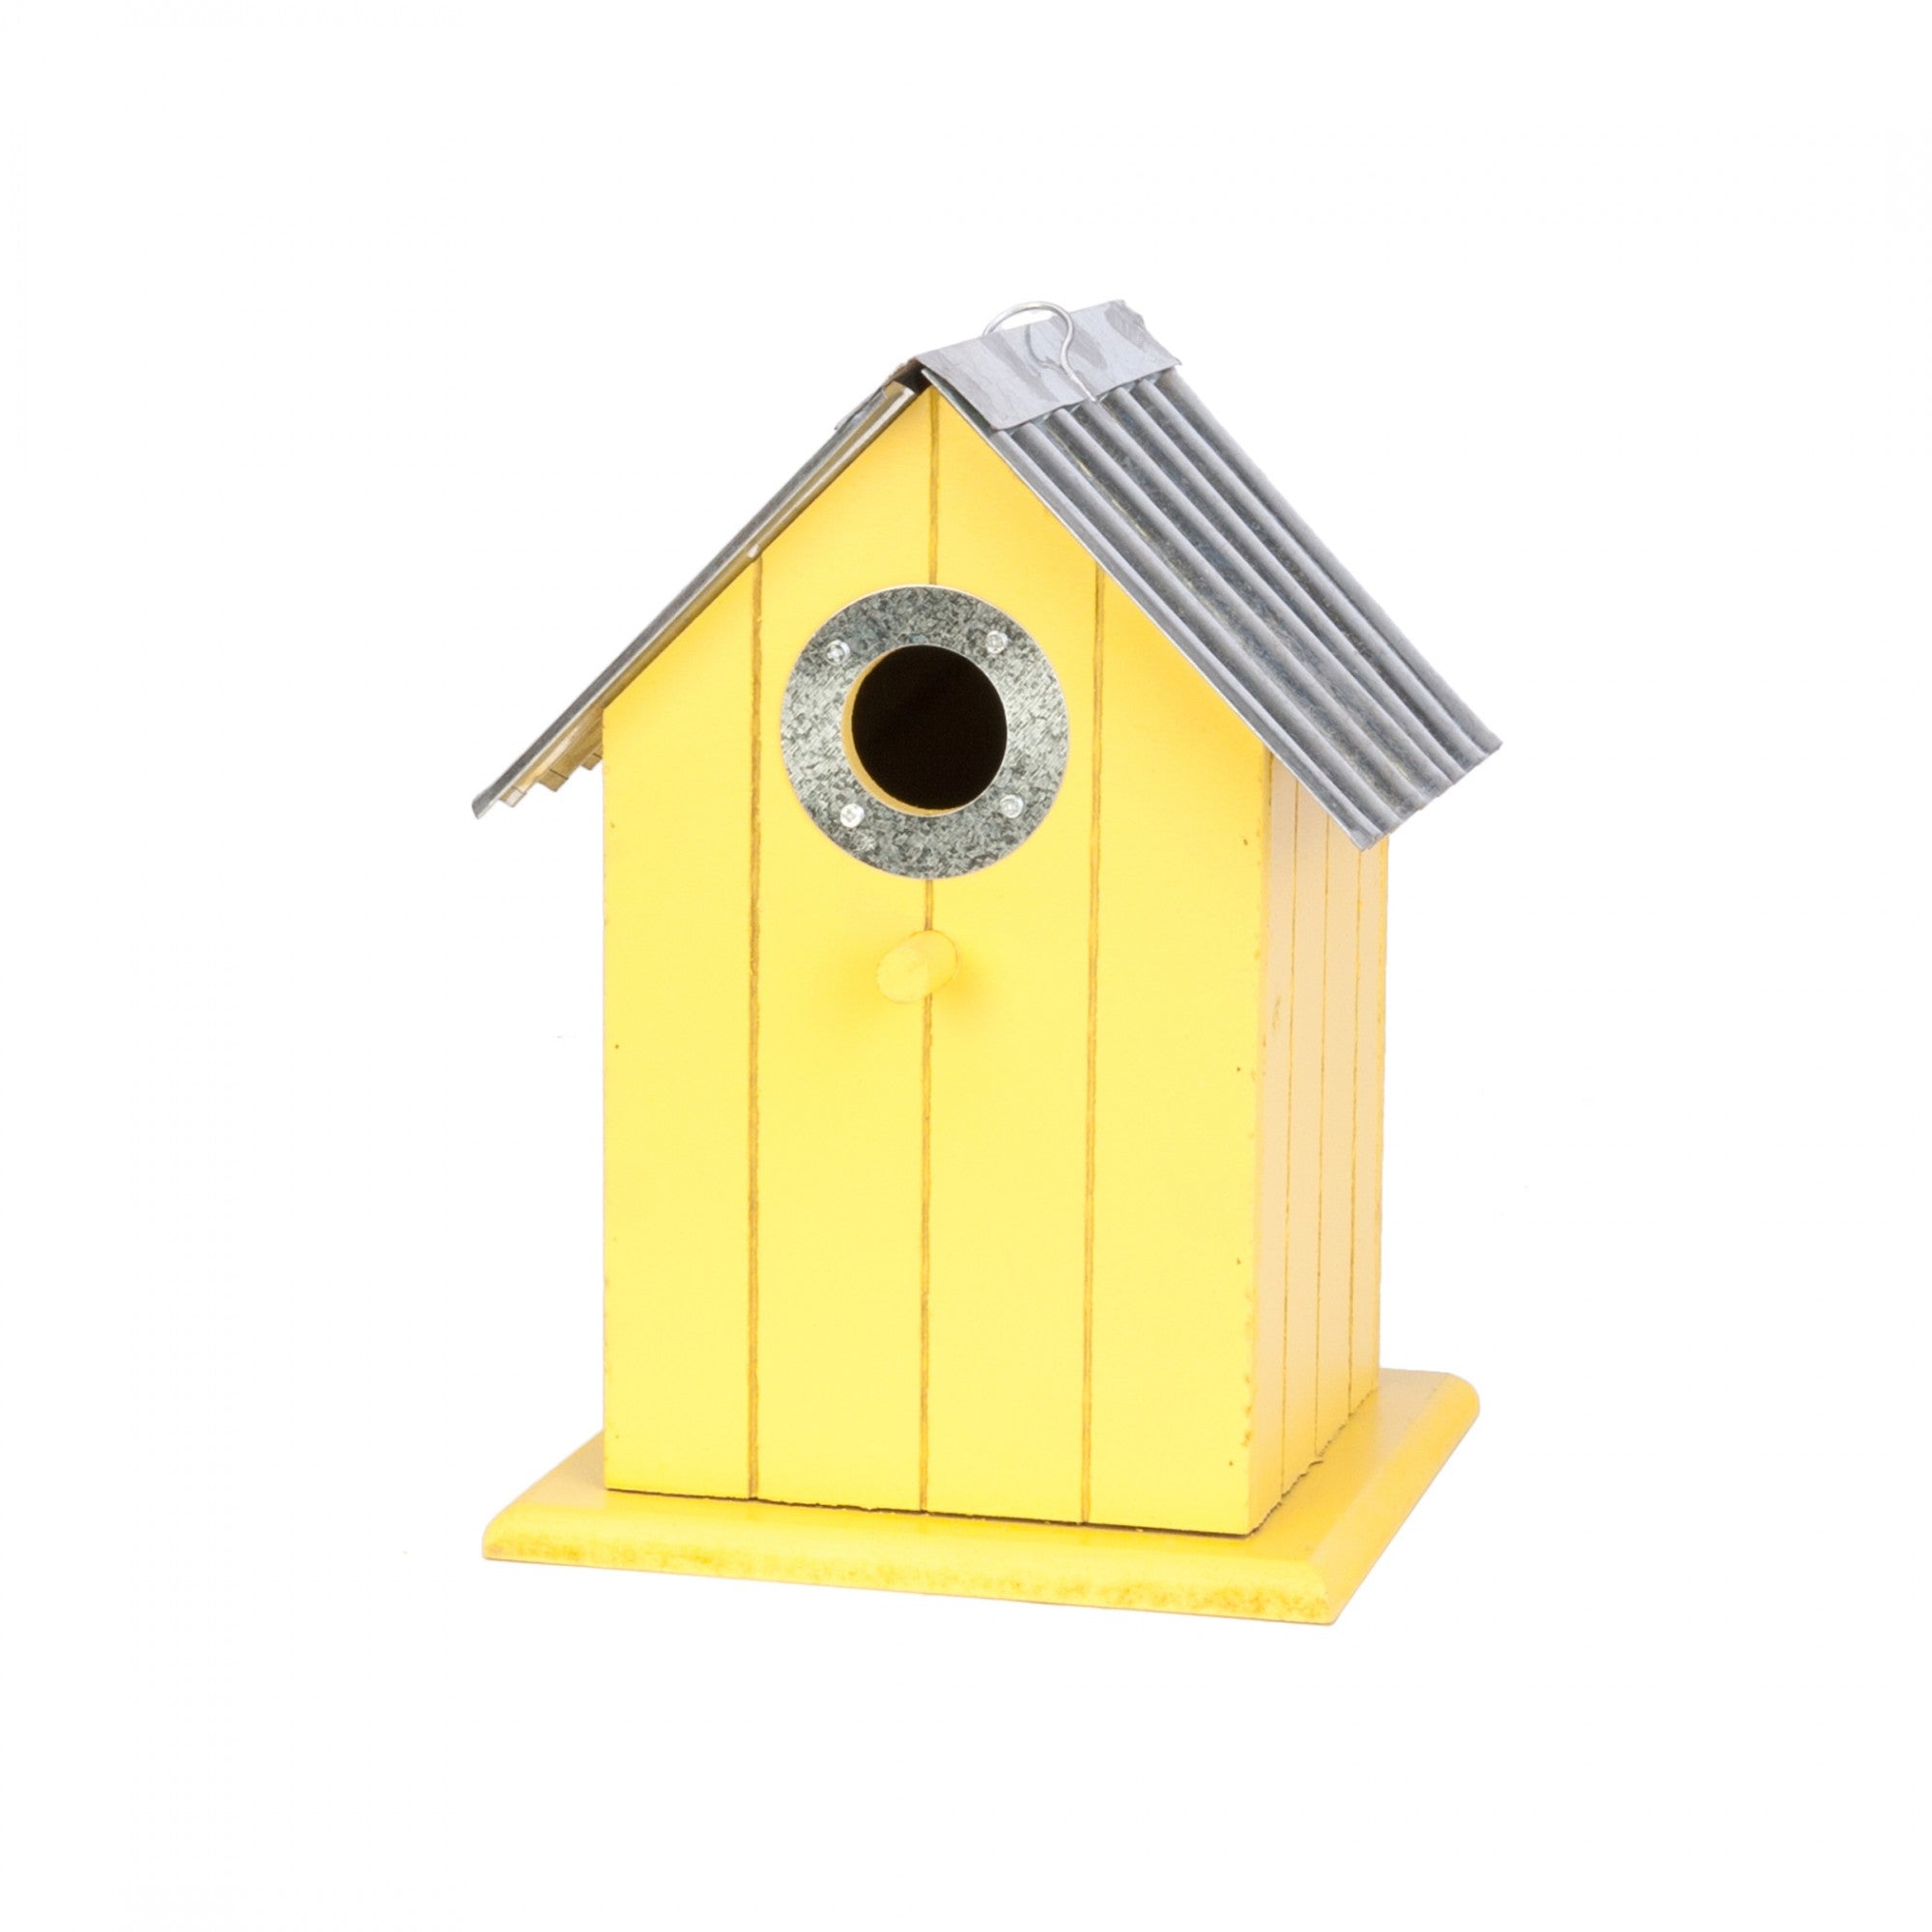 View Assorted Colourful Bird Houses H22 x W16 x D15cm information